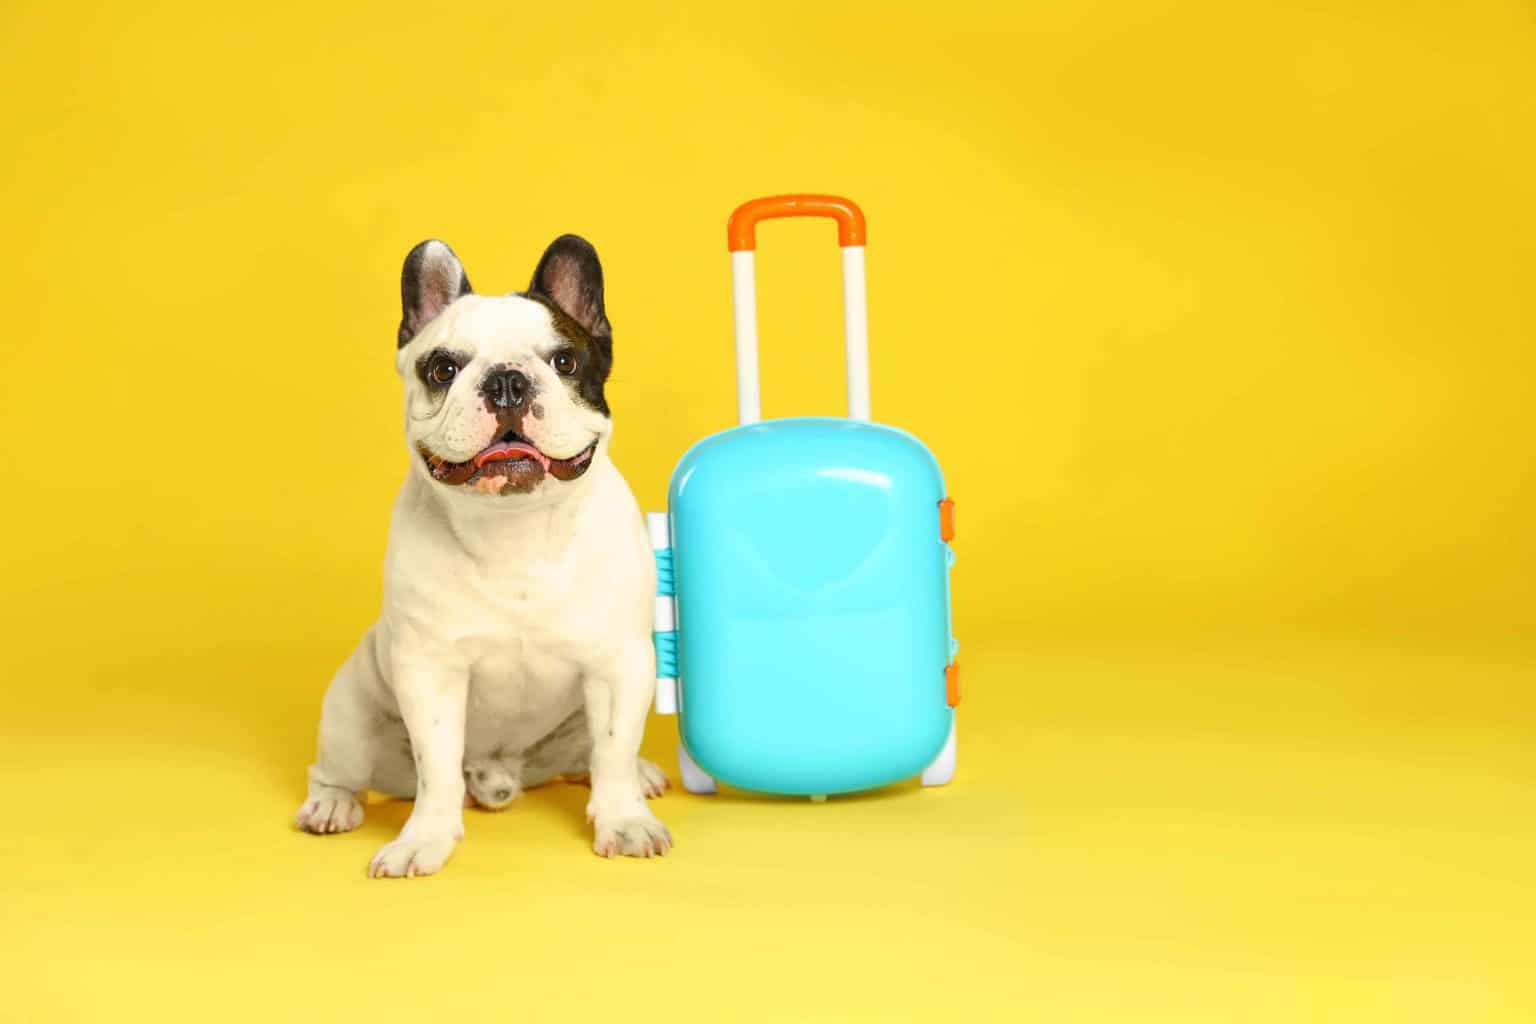 Pet-friendly accommodations photo illustration of French bulldog sitting next to small blue suitcase.